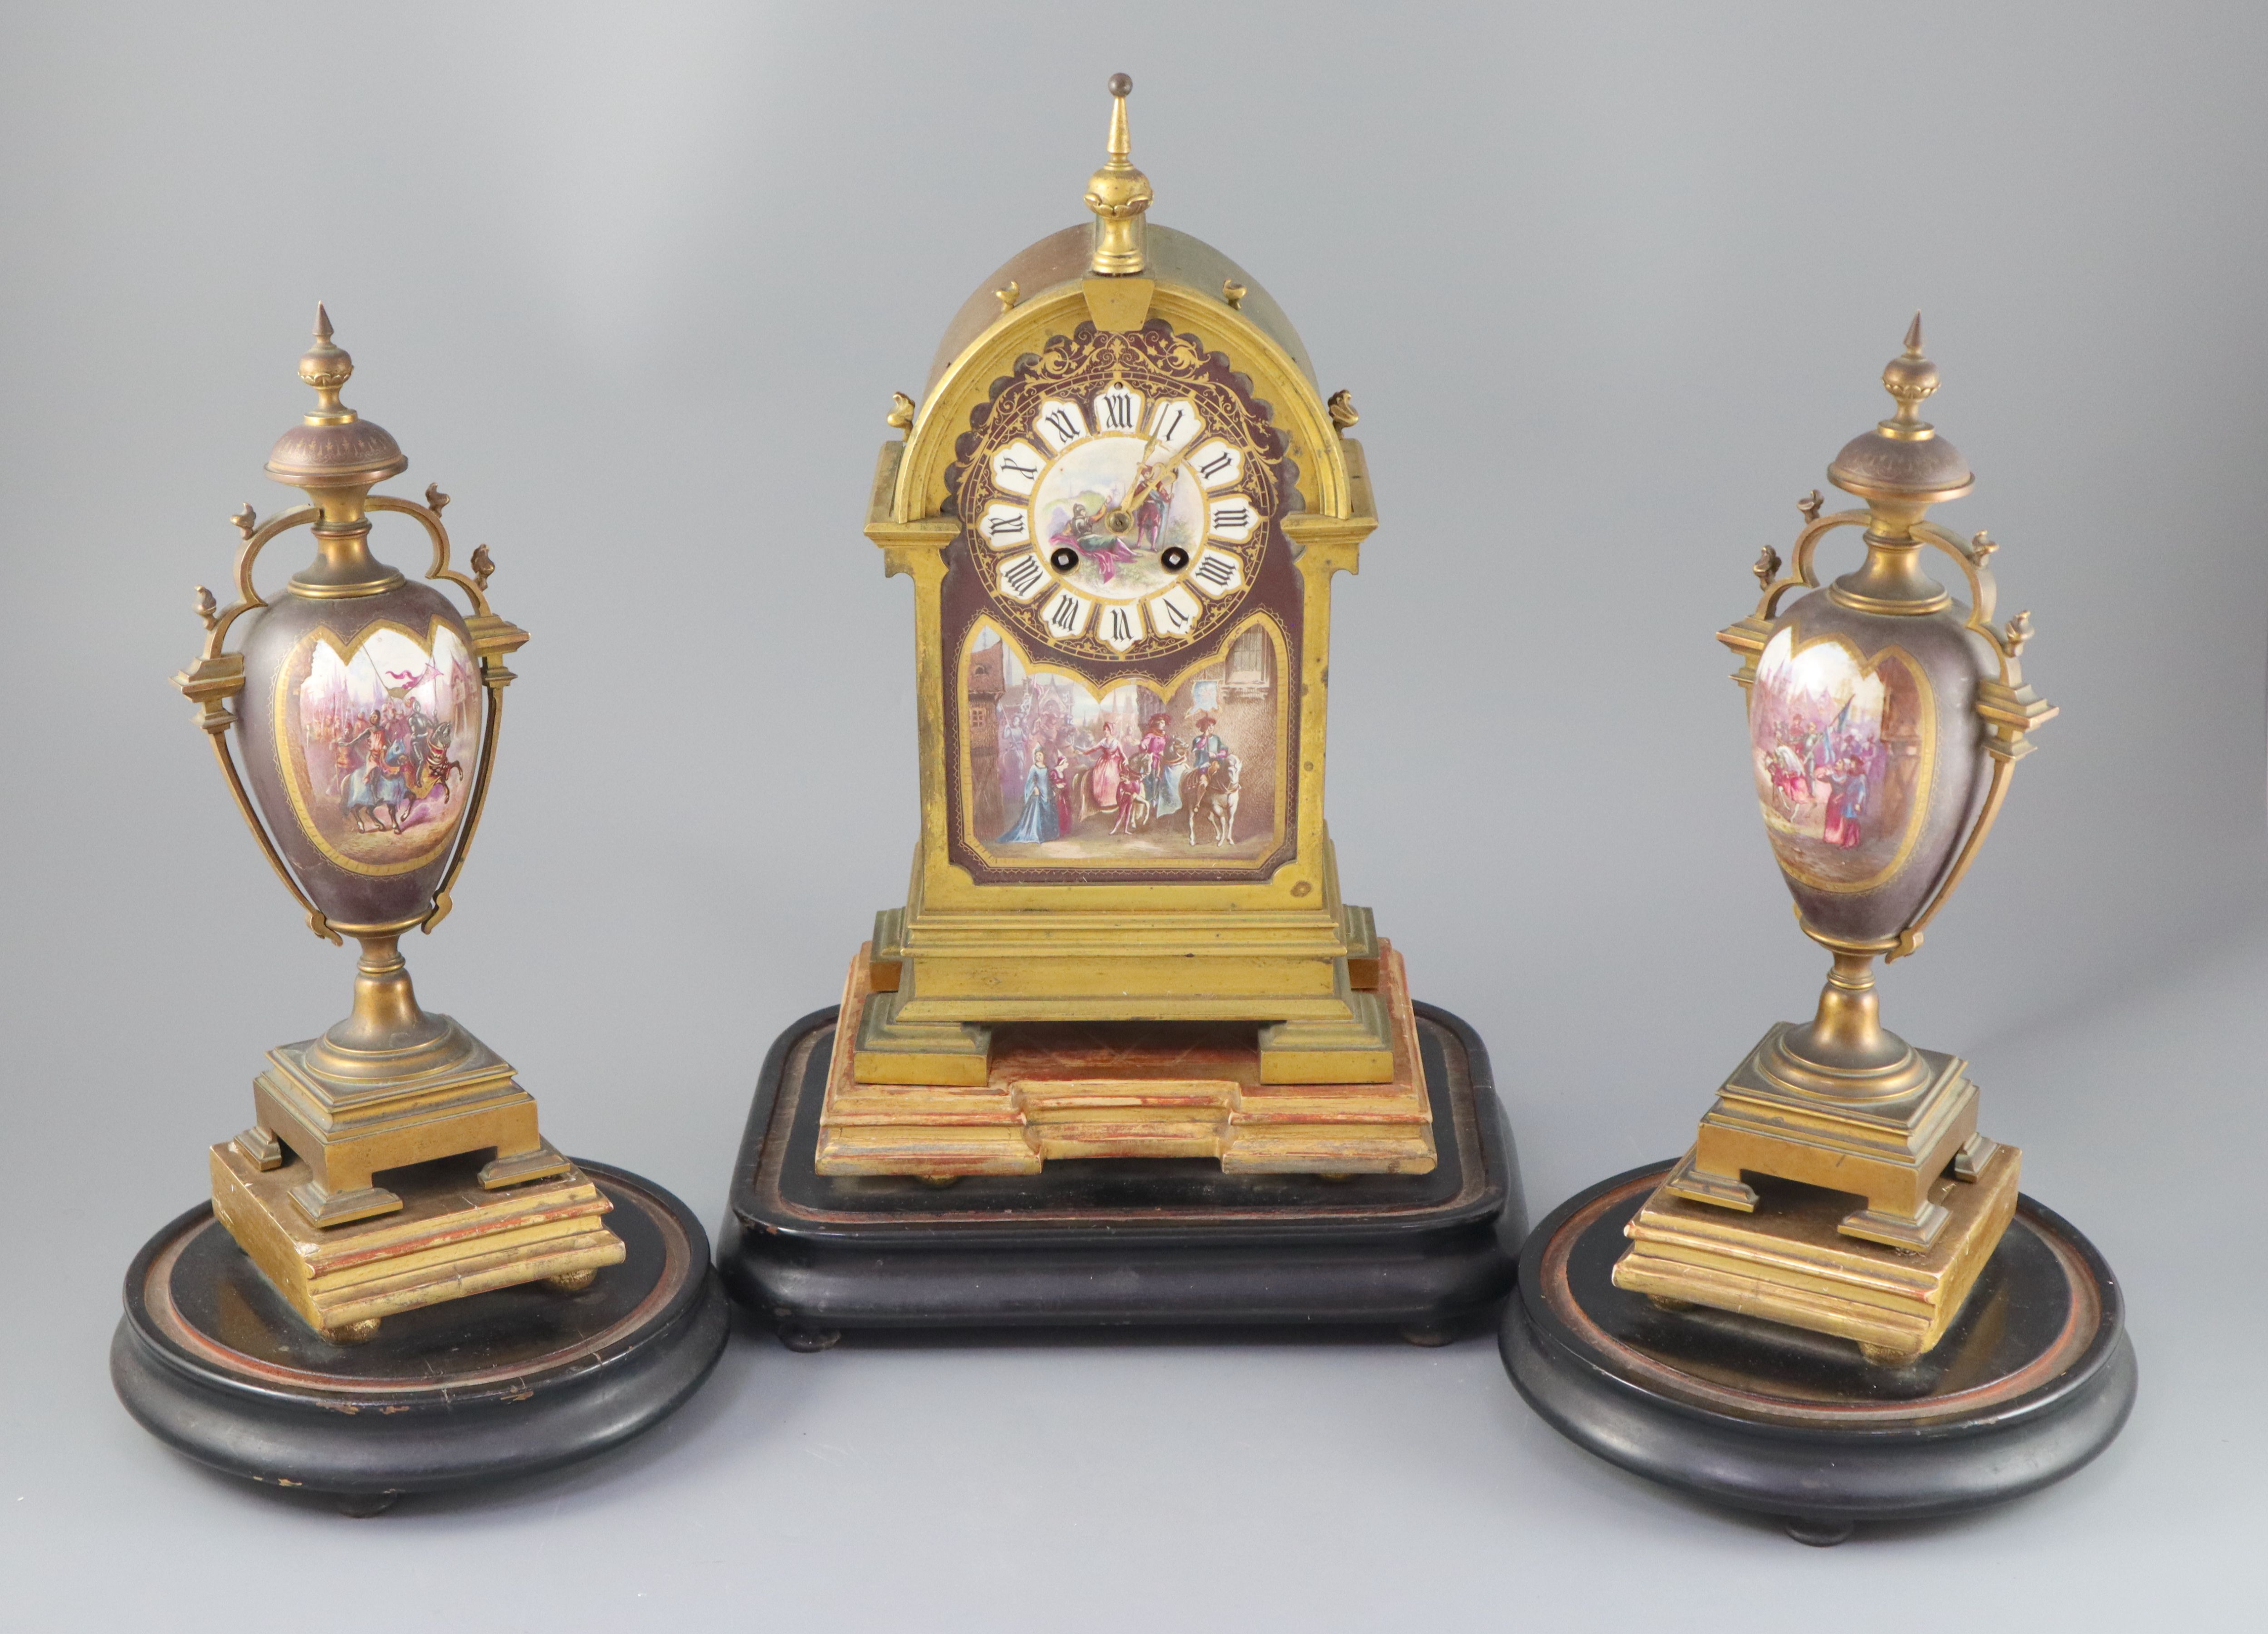 A 19th century French ormolu and enamelled porcelain clock garniture, clock height 13.75in. urns 11.5in. overall on both plinths 17in.